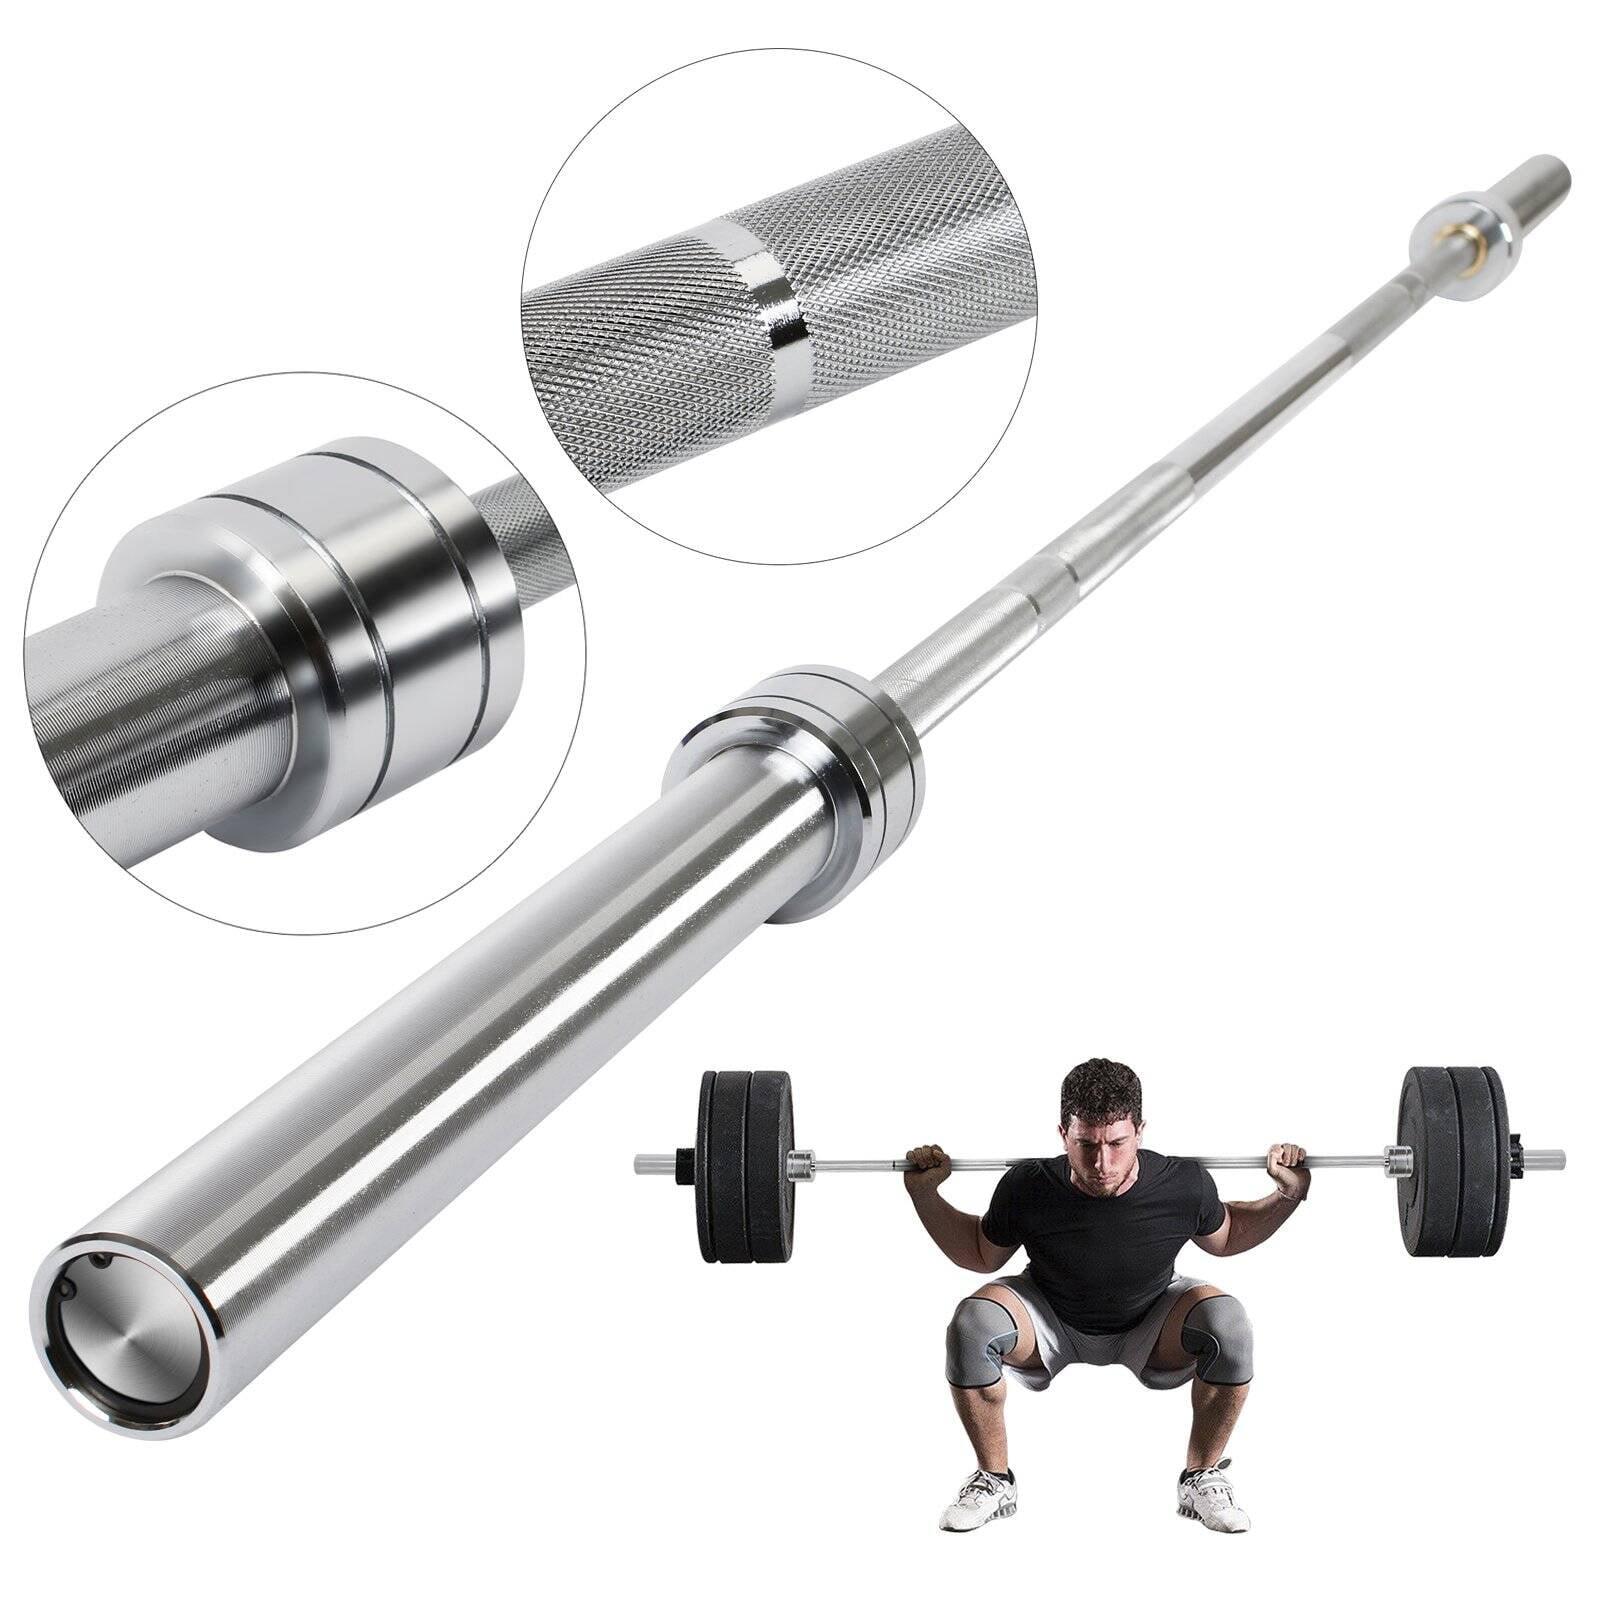 5Ft/1.5m Olympic Chrome Bar Weight Lifting Barbell Rod for Workout Gym Training 